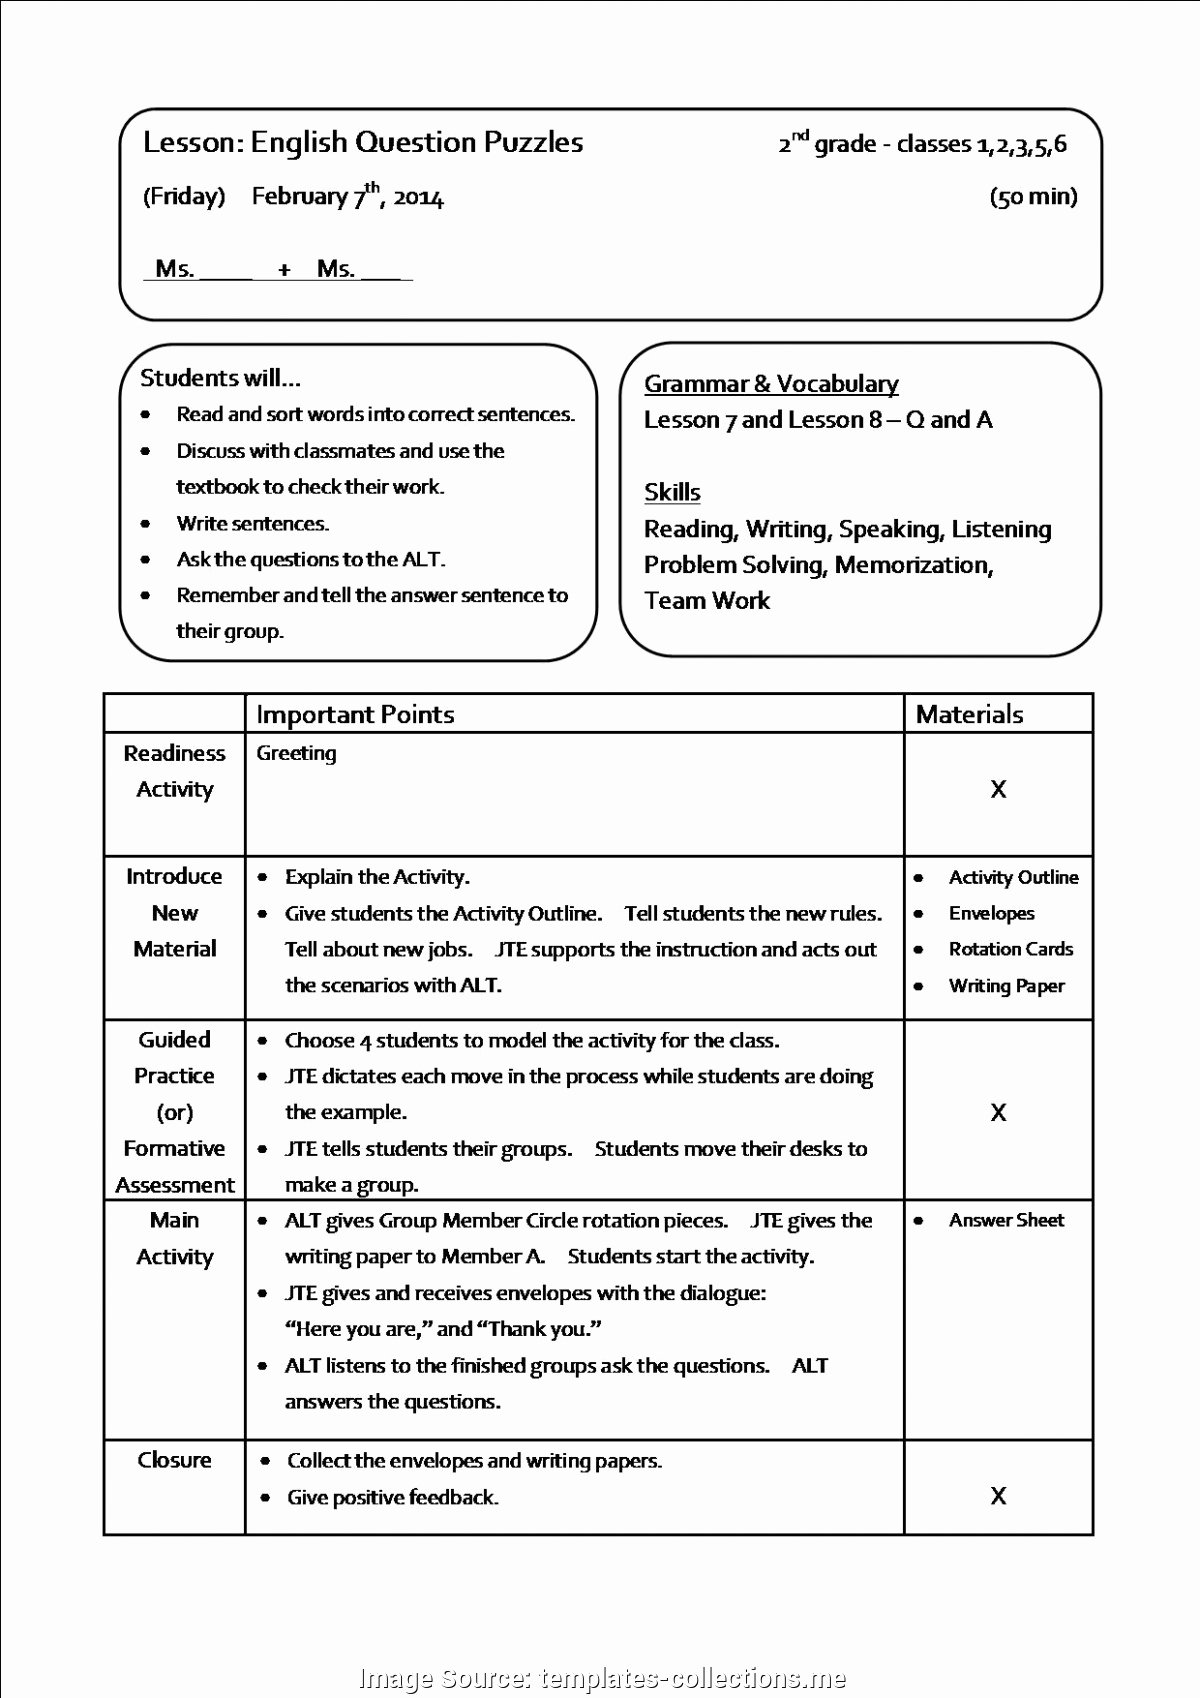 Best Lesson Plan Template Awesome Fresh Elementary English Lesson Plans Lesson Plan Template